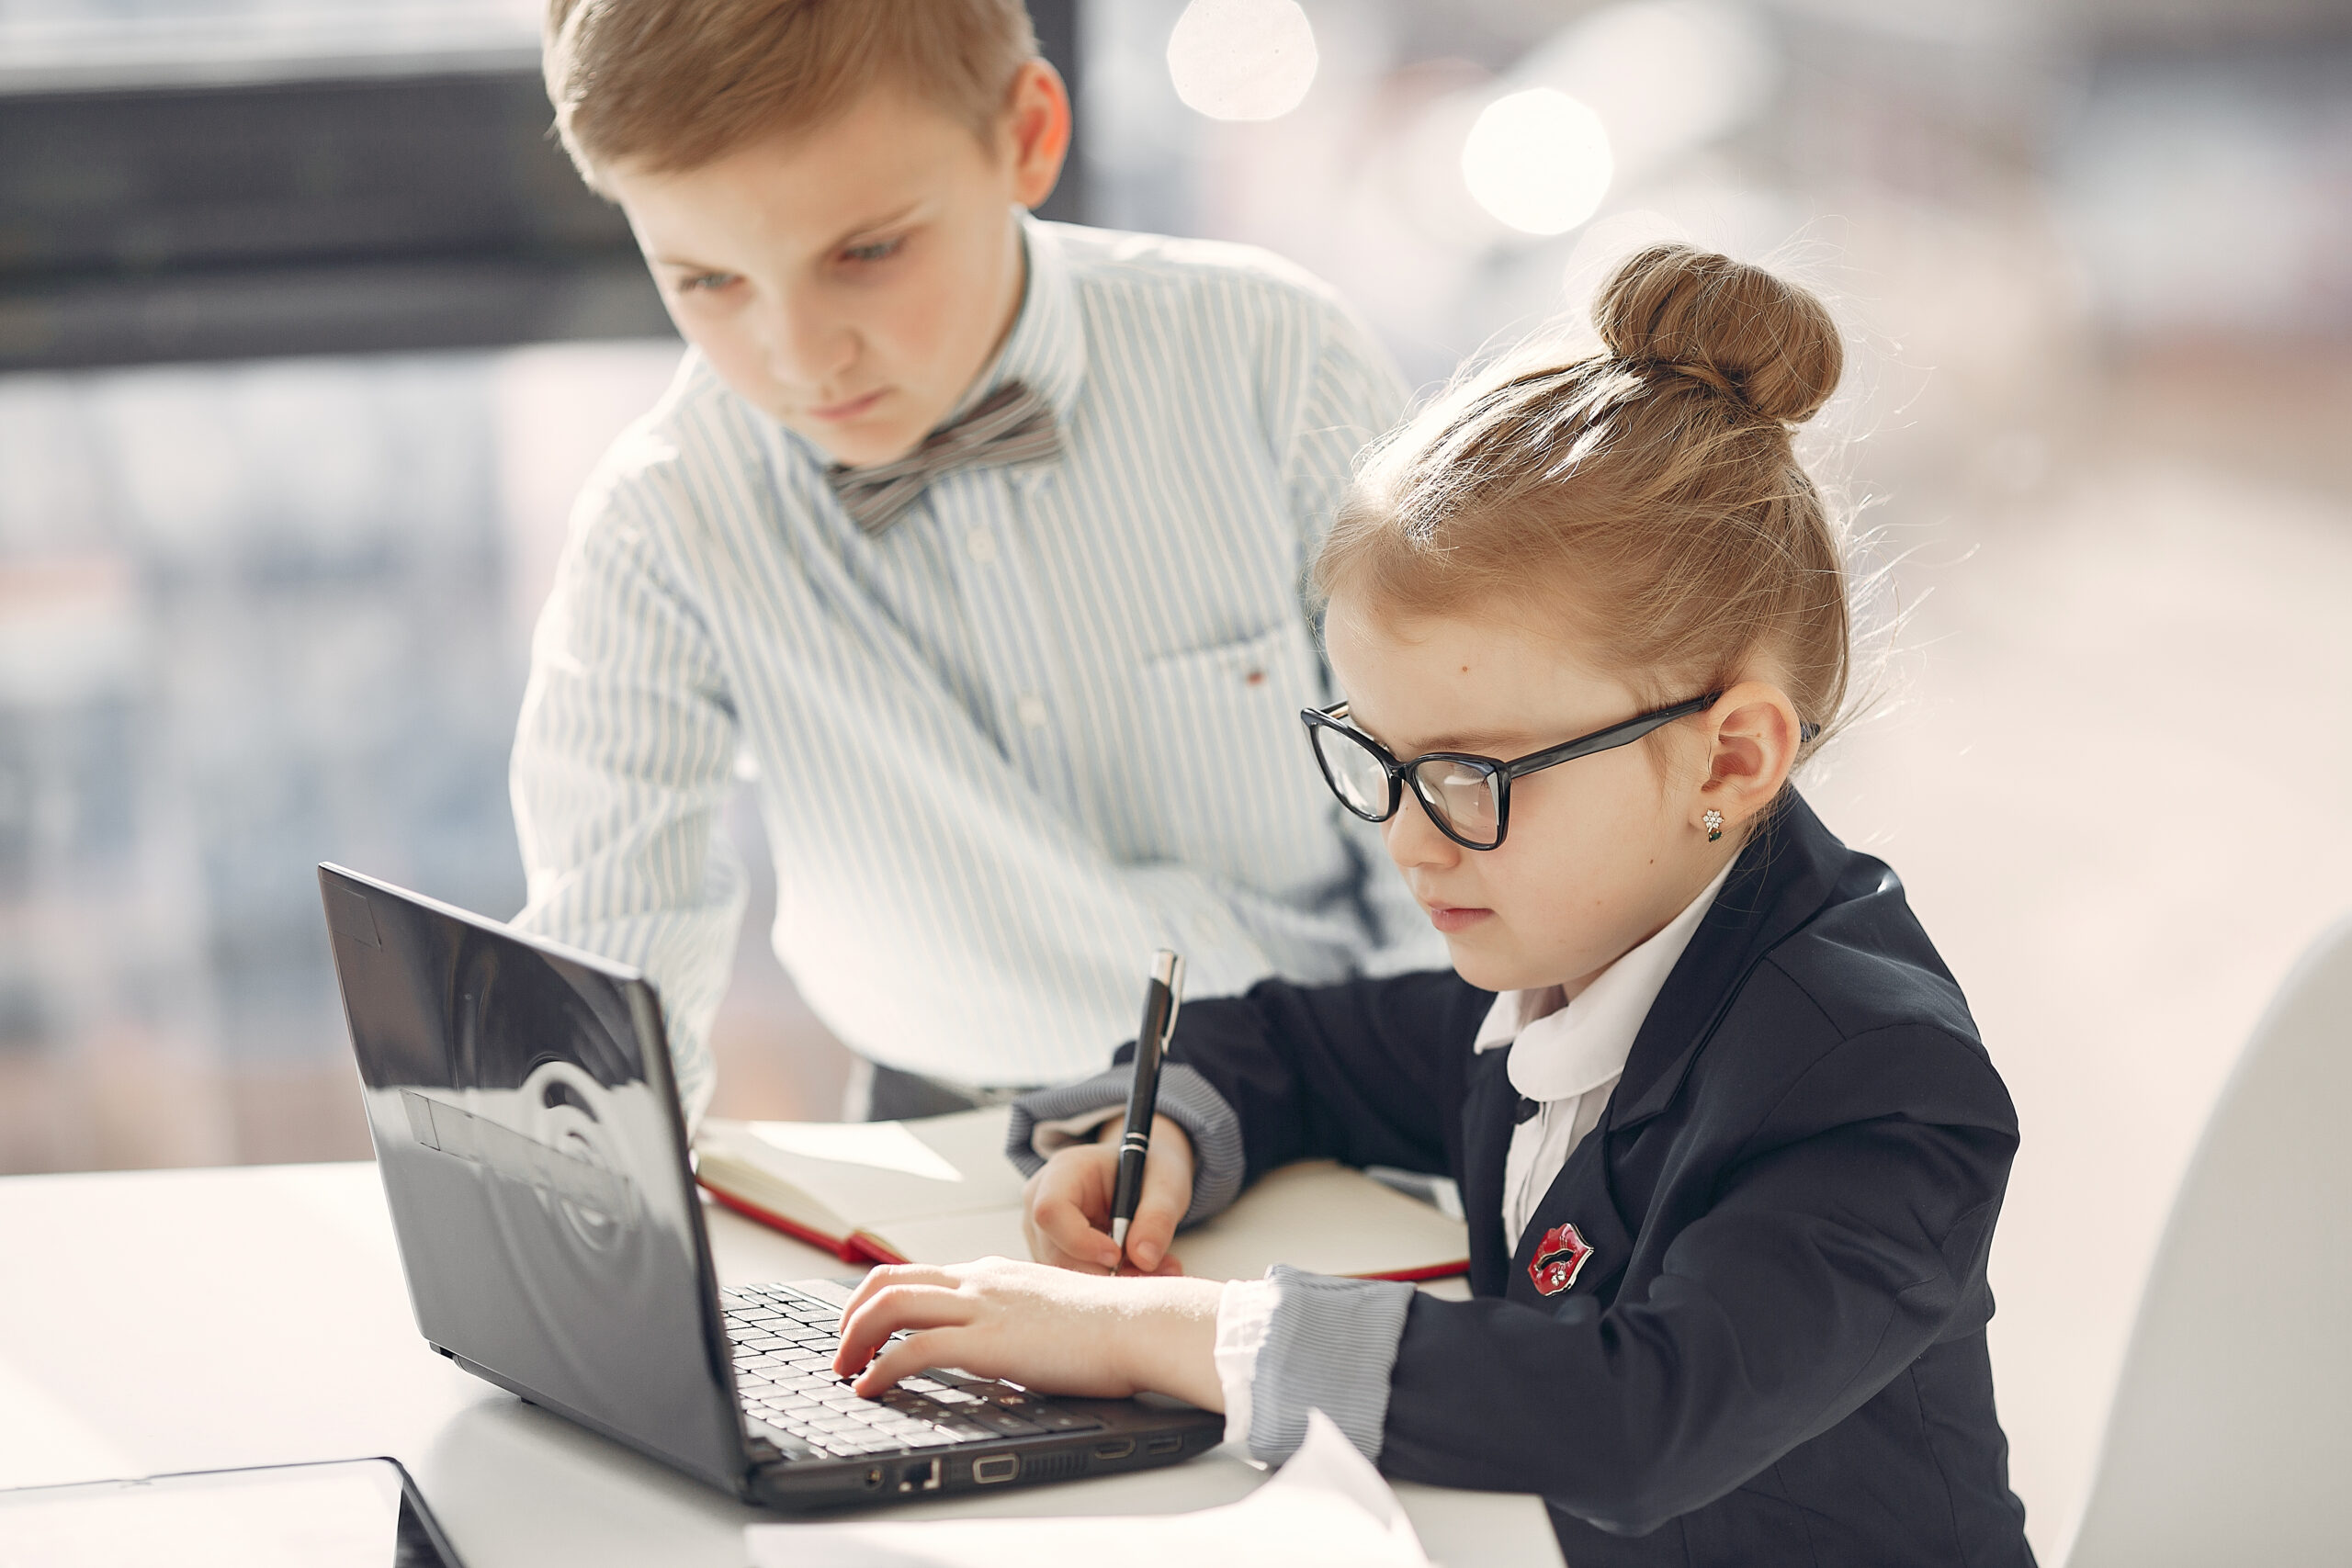 Business theme. Children in a business style. Kid with a laptop.